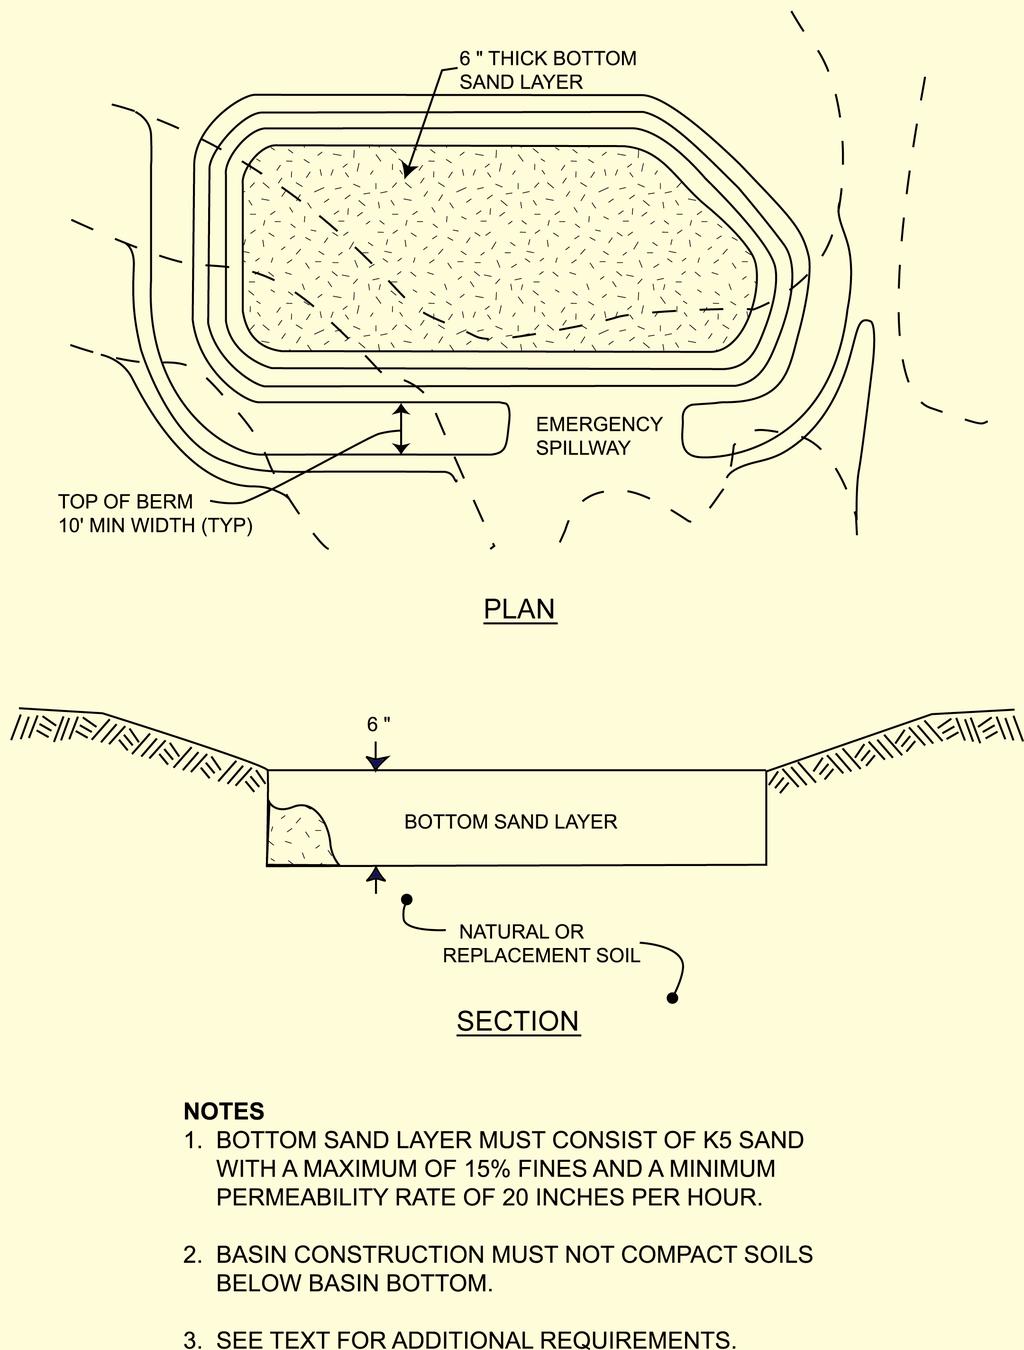 Figure 9.5-1: Infiltration Basin Components Source: Adapted from T&M Associates.